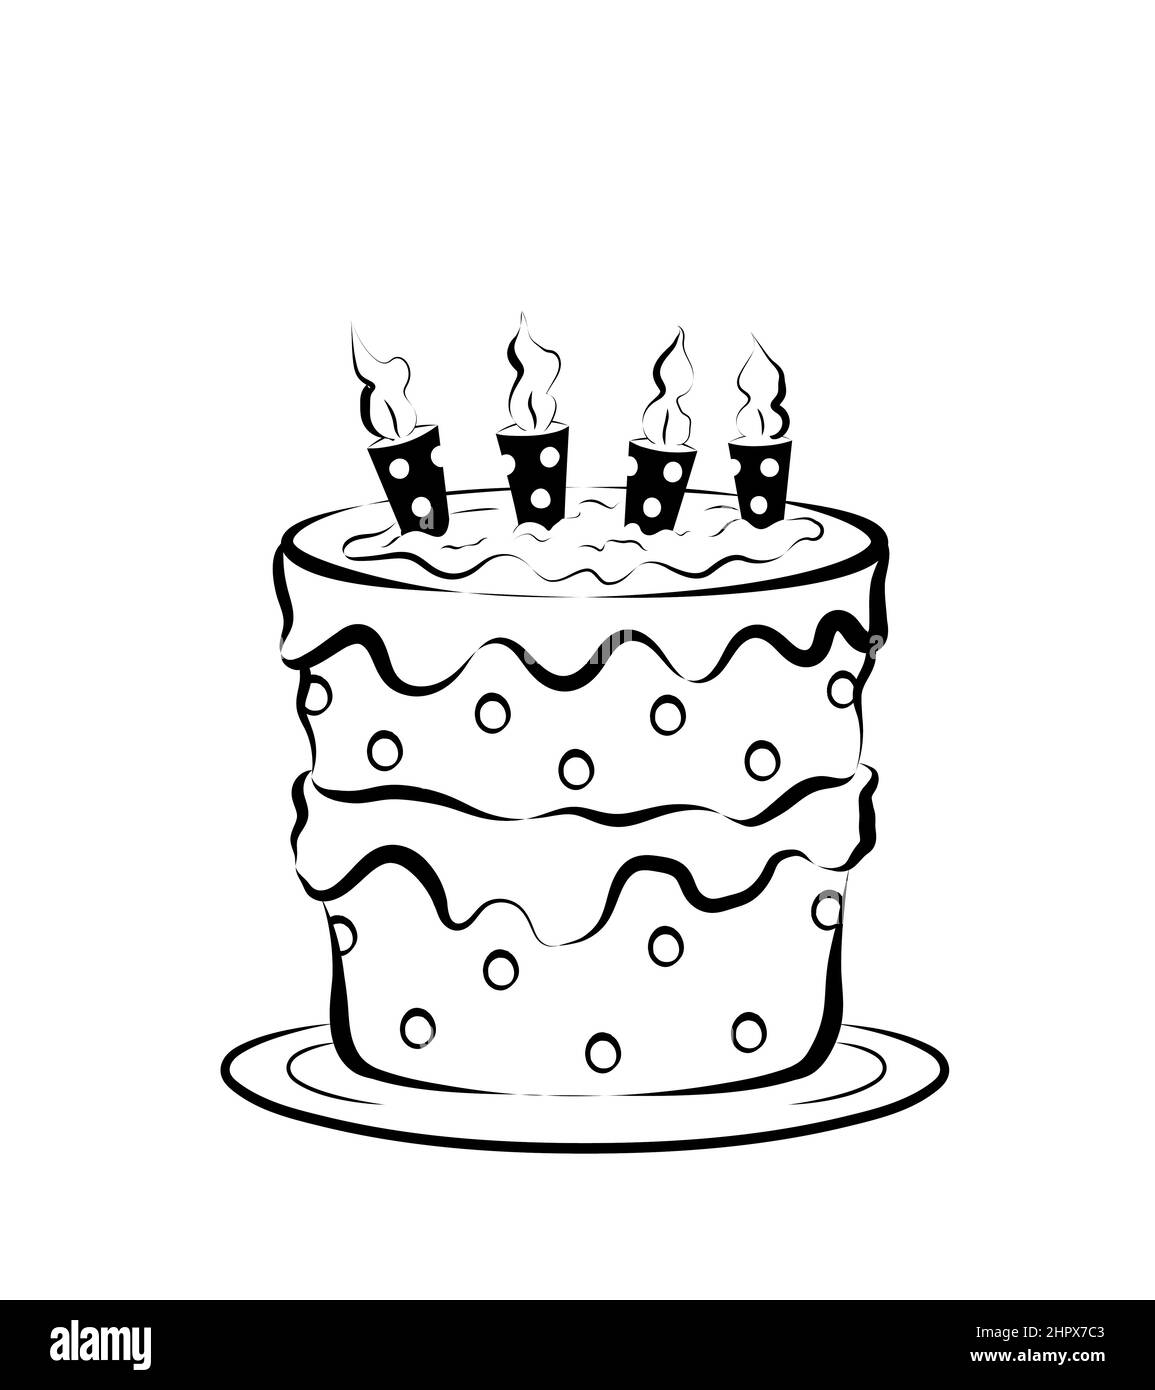 black and white birthday cake for kids with four candles. illustration isolated on white background Stock Photo